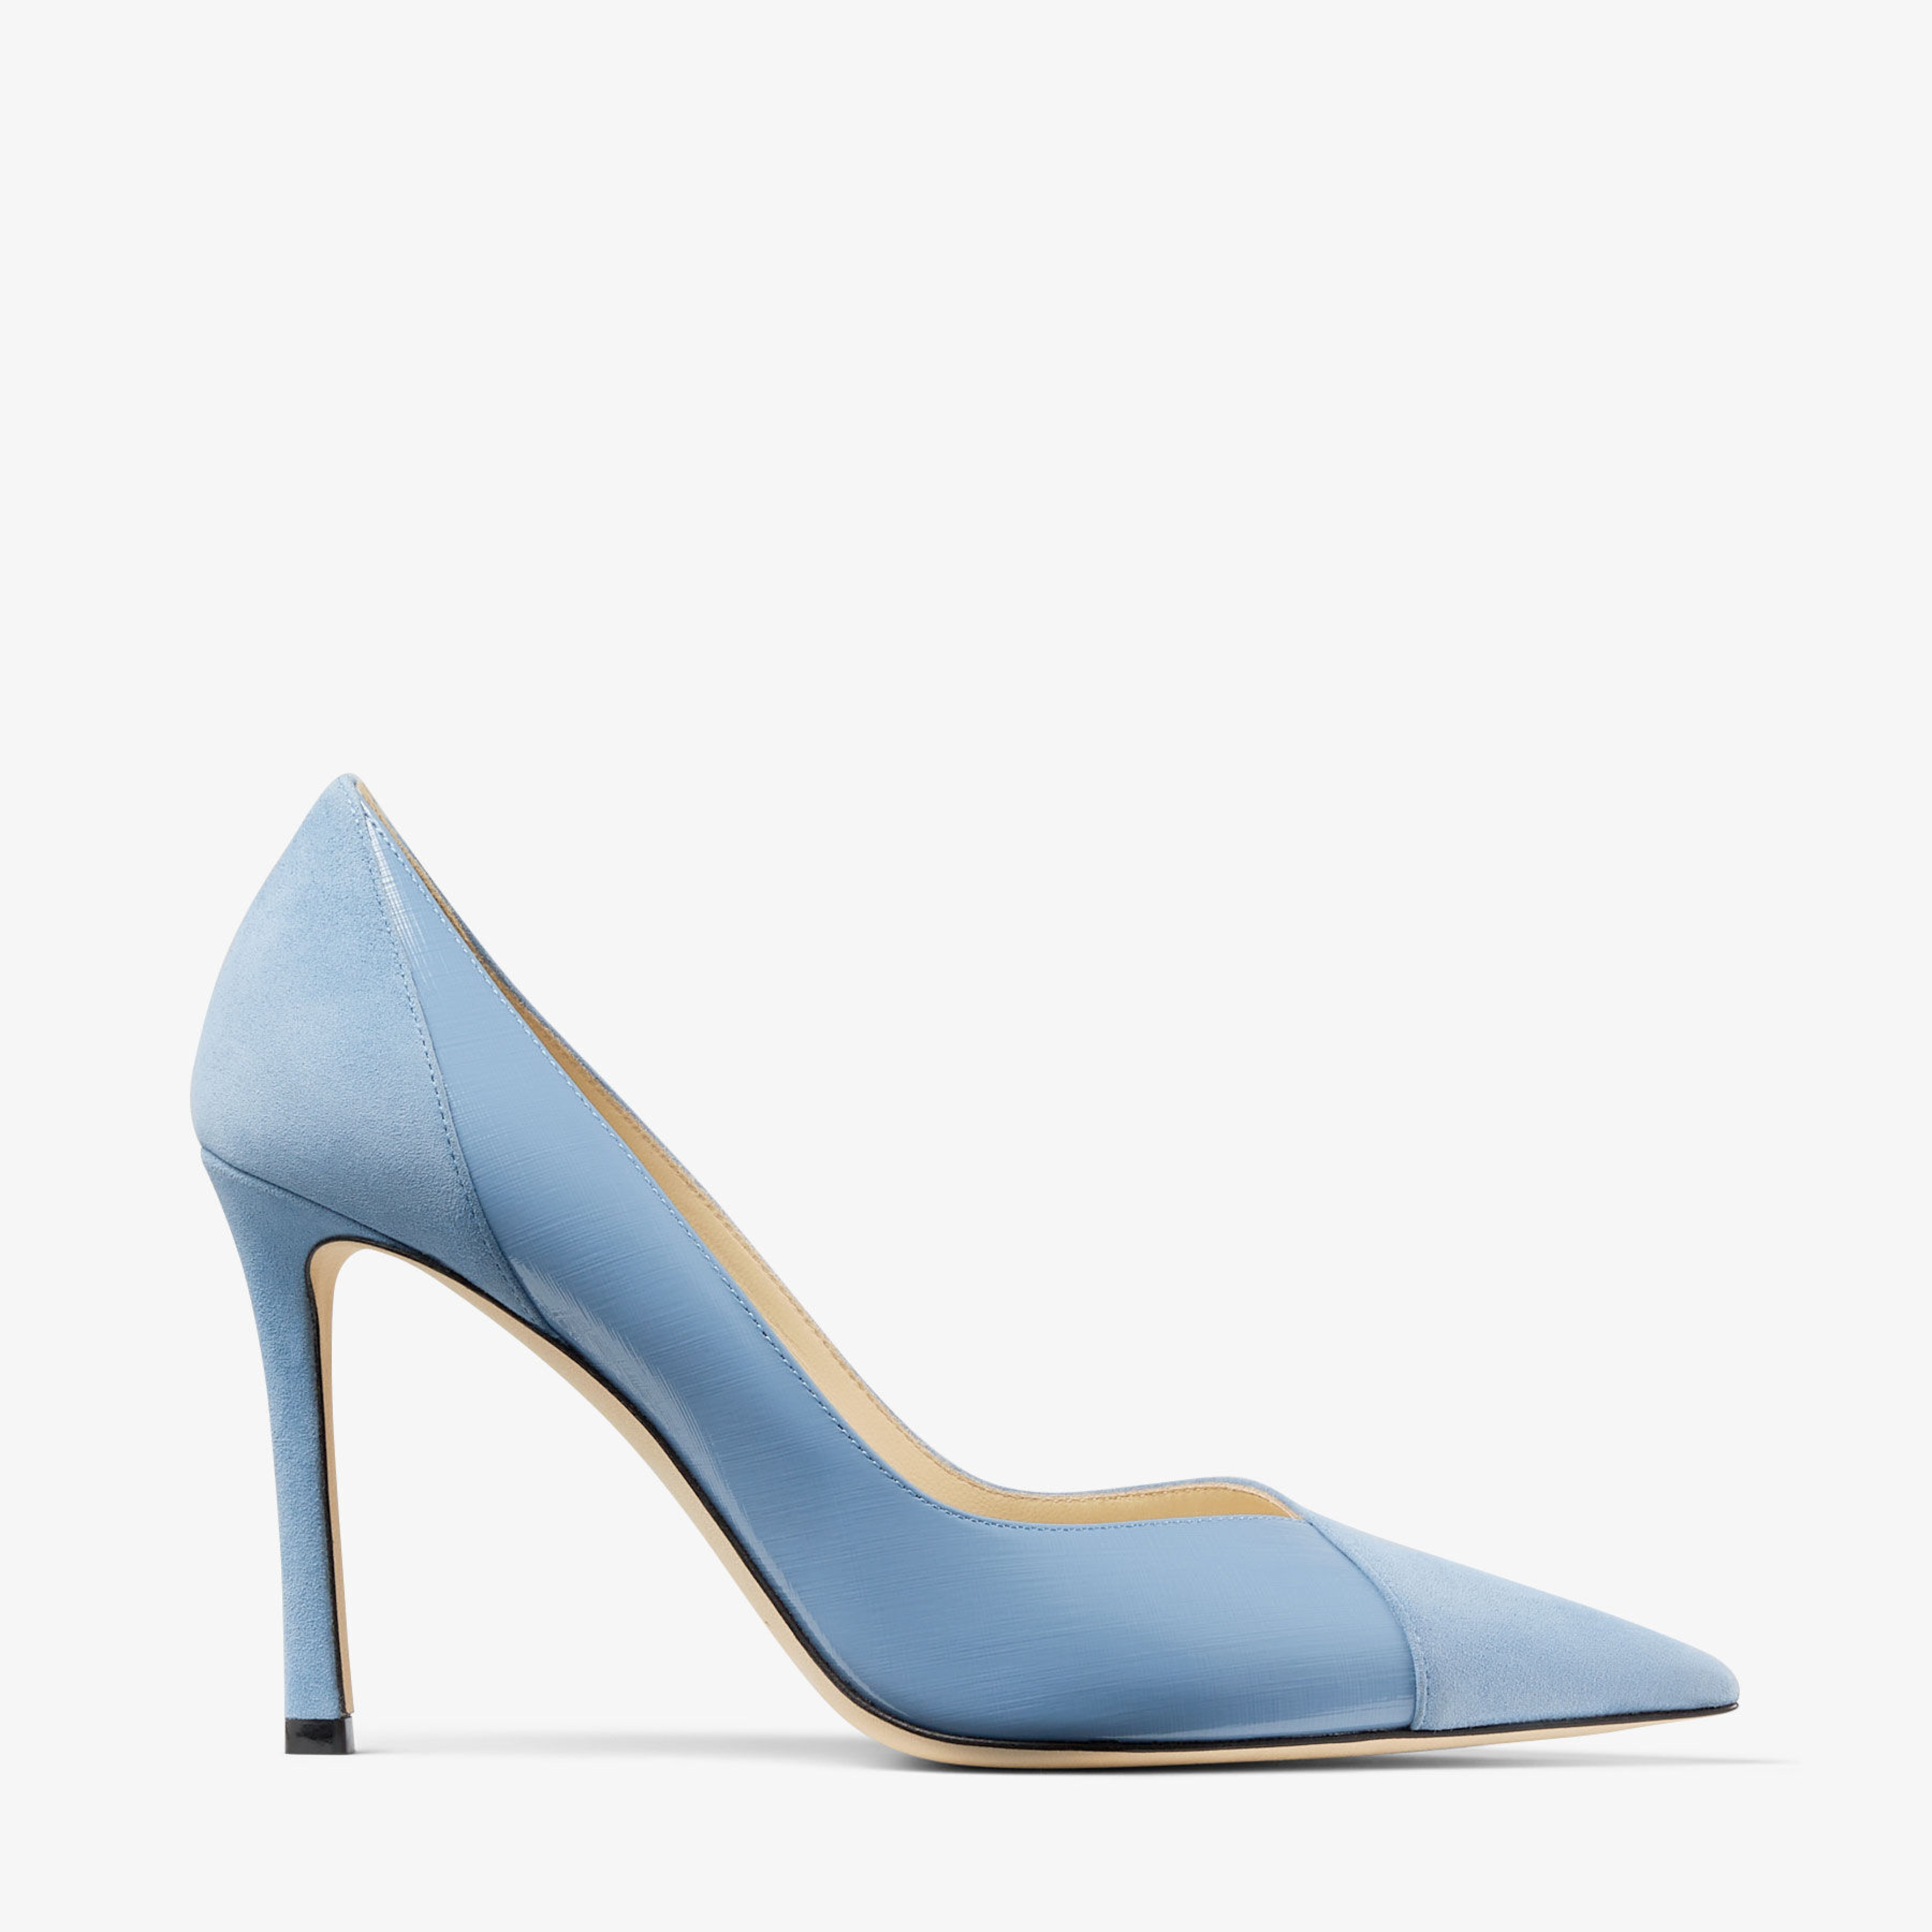 Jimmy Choo - Smoky Blue Suede and Etched Patent Leather Pumps